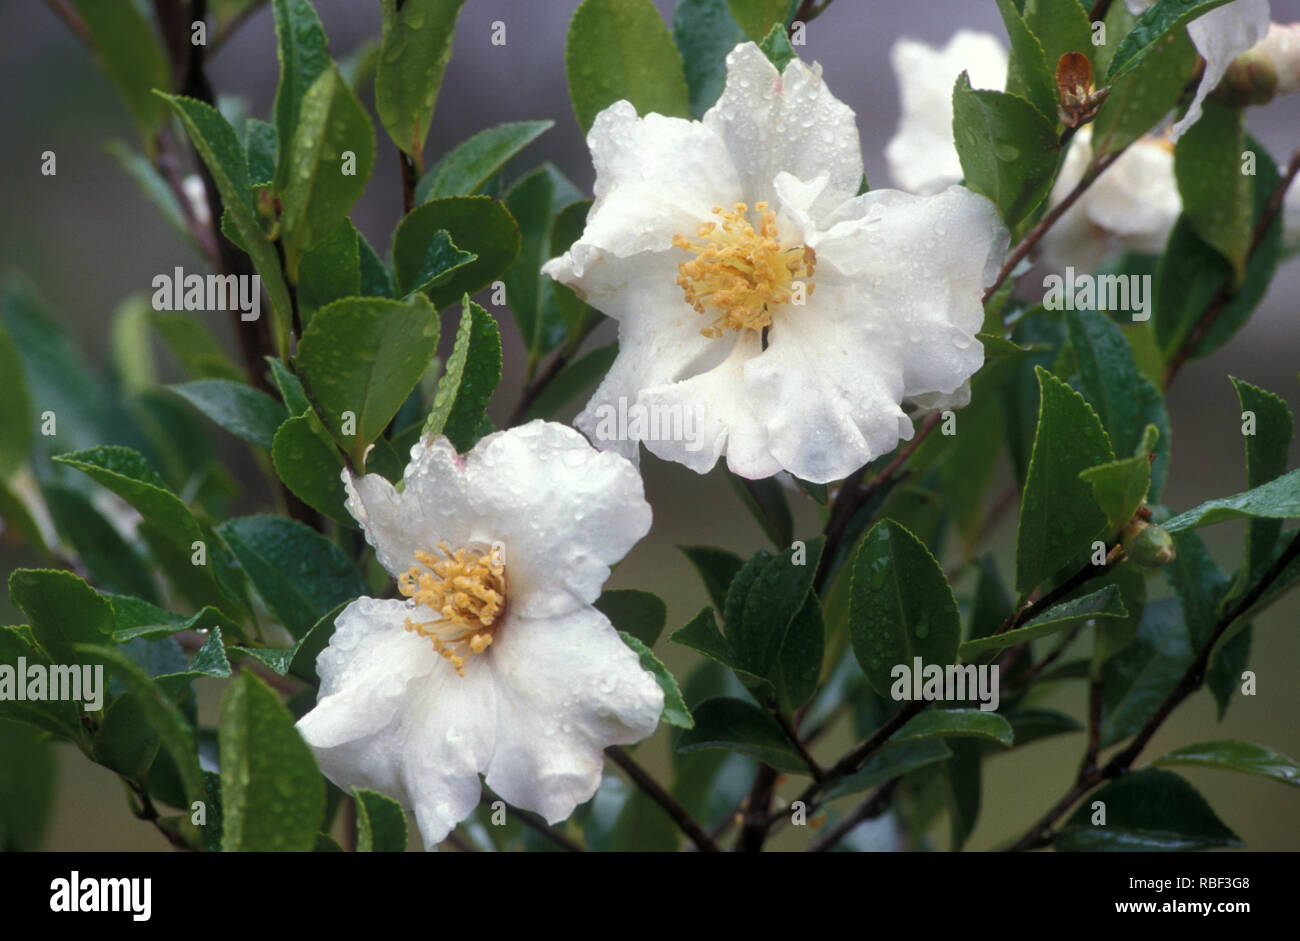 WHITE CAMELLIA FLOWERS COVERED IN RAINDROPS Stock Photo